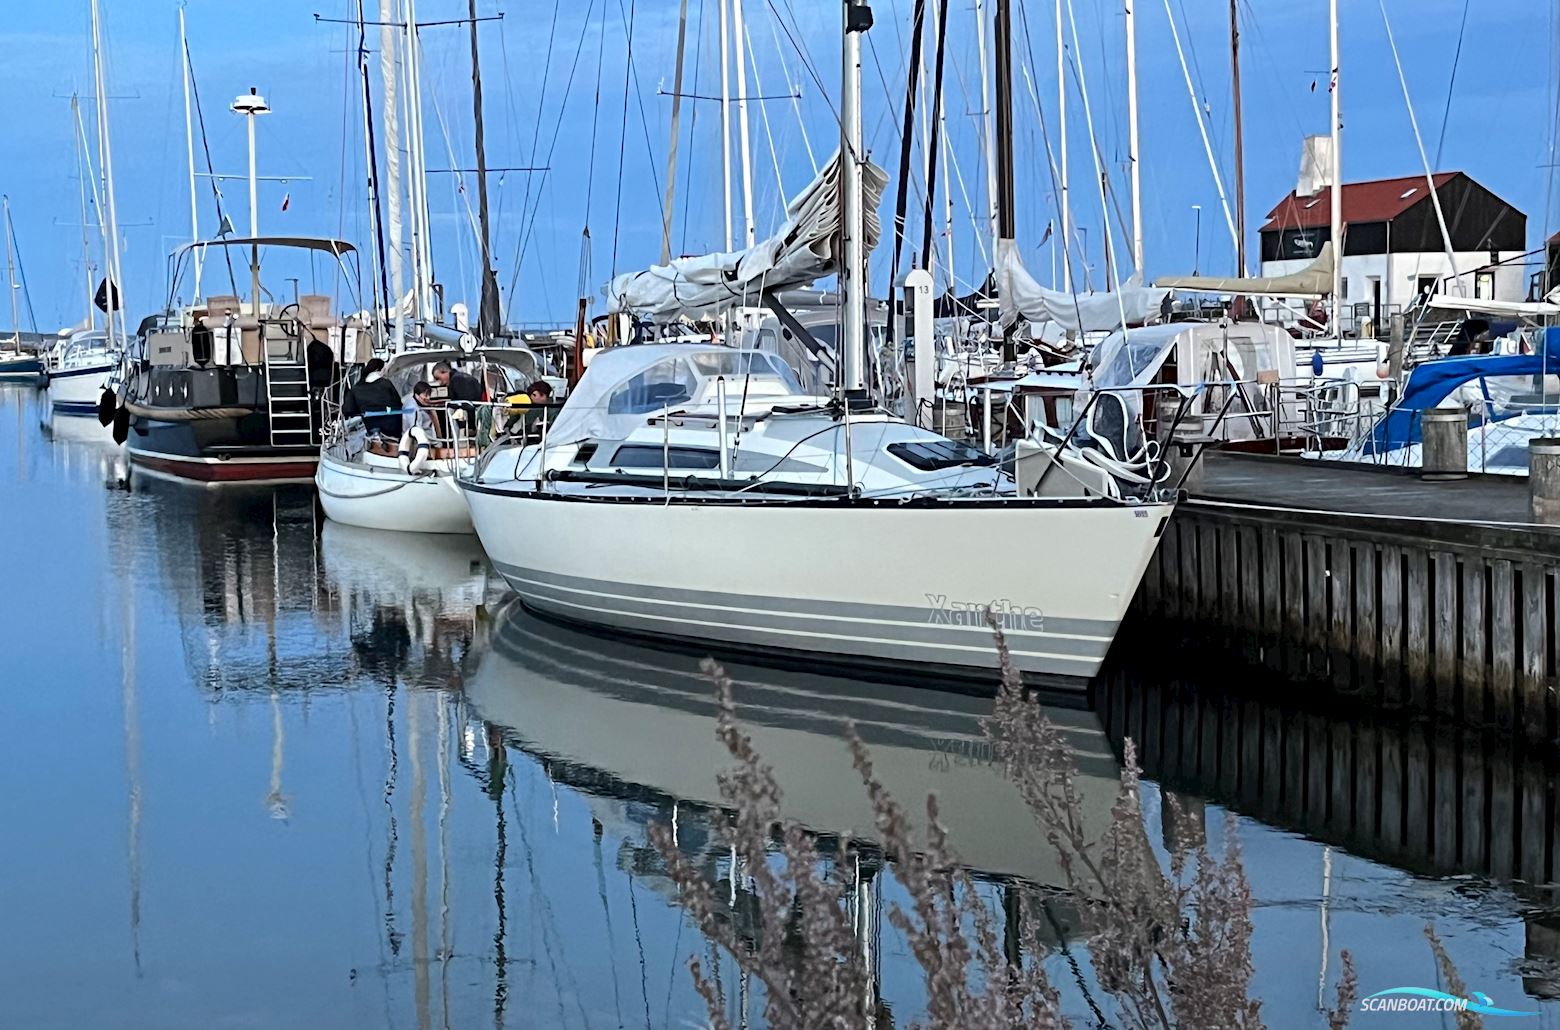 X-Yachts X-342 Sailing boat 1989, with Volvo Penta MD2030 engine, Denmark